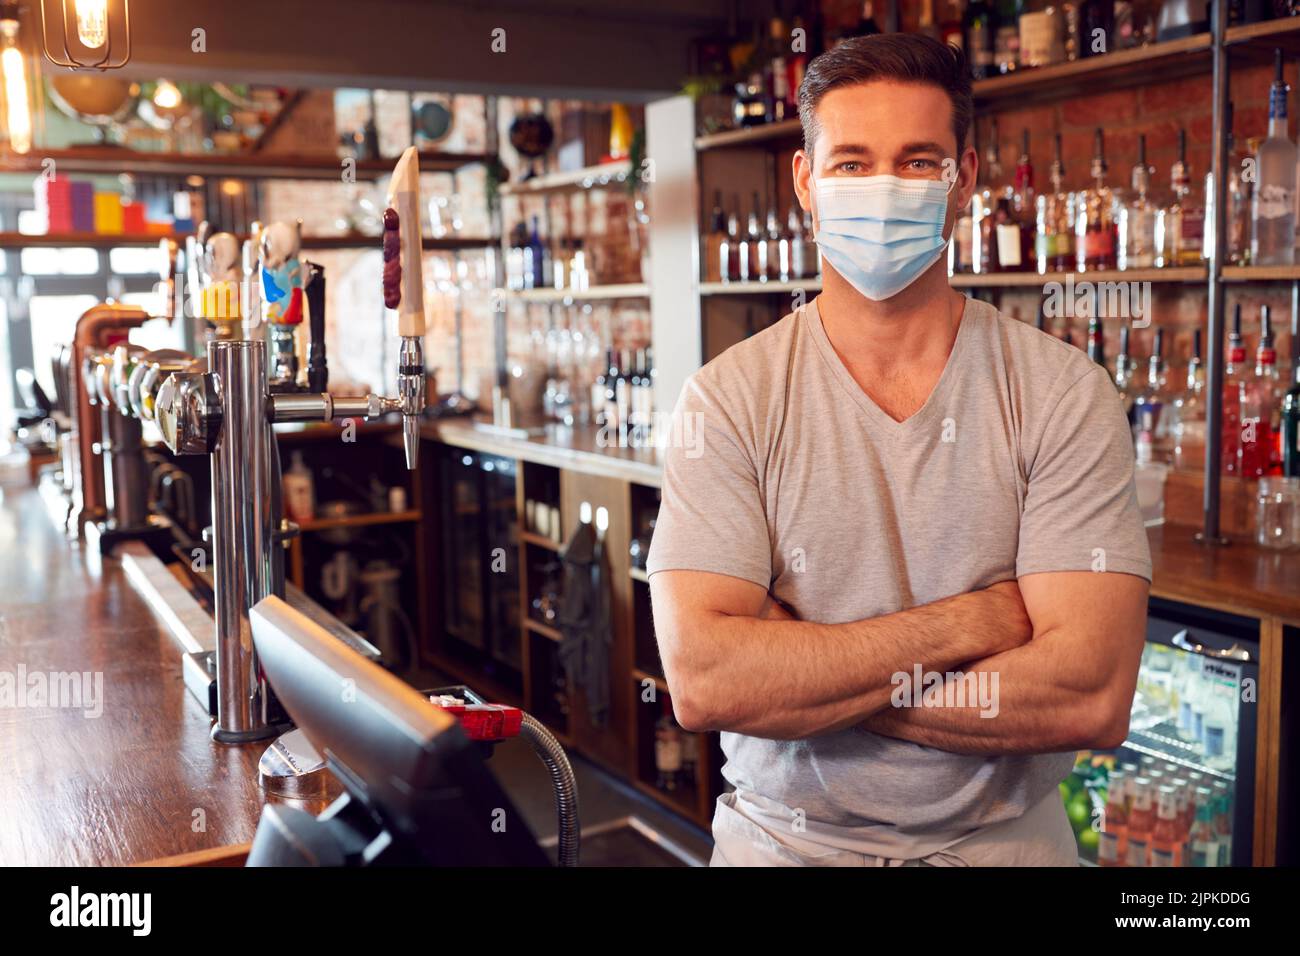 gastronomy, staff, bar, mouth and nose protection, gastronomies, staffs, bars Stock Photo